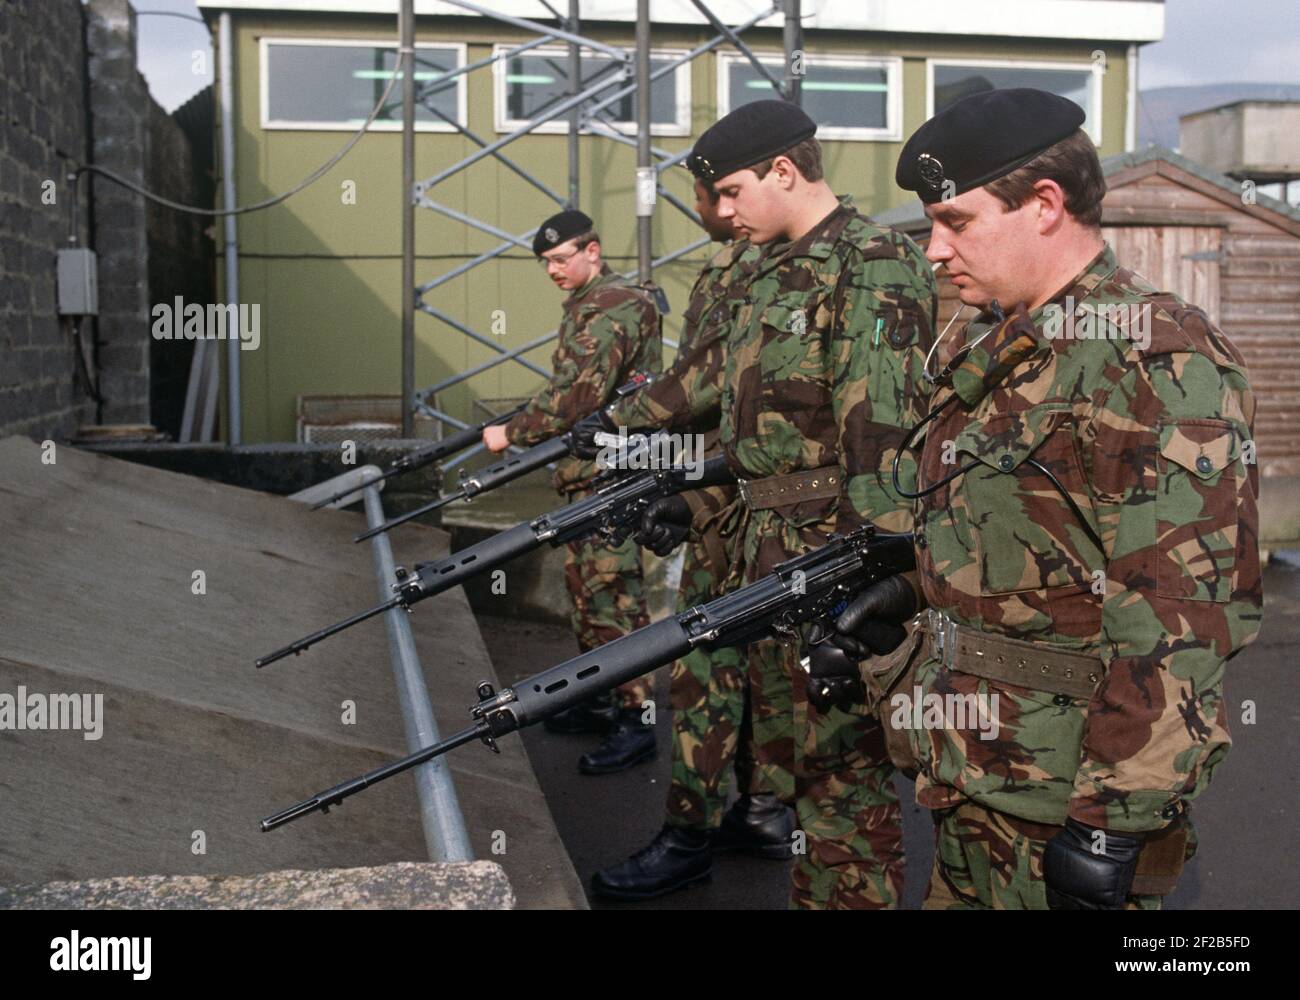 British Army Soldiers Unloading Weapons In Belfast Army Base During The